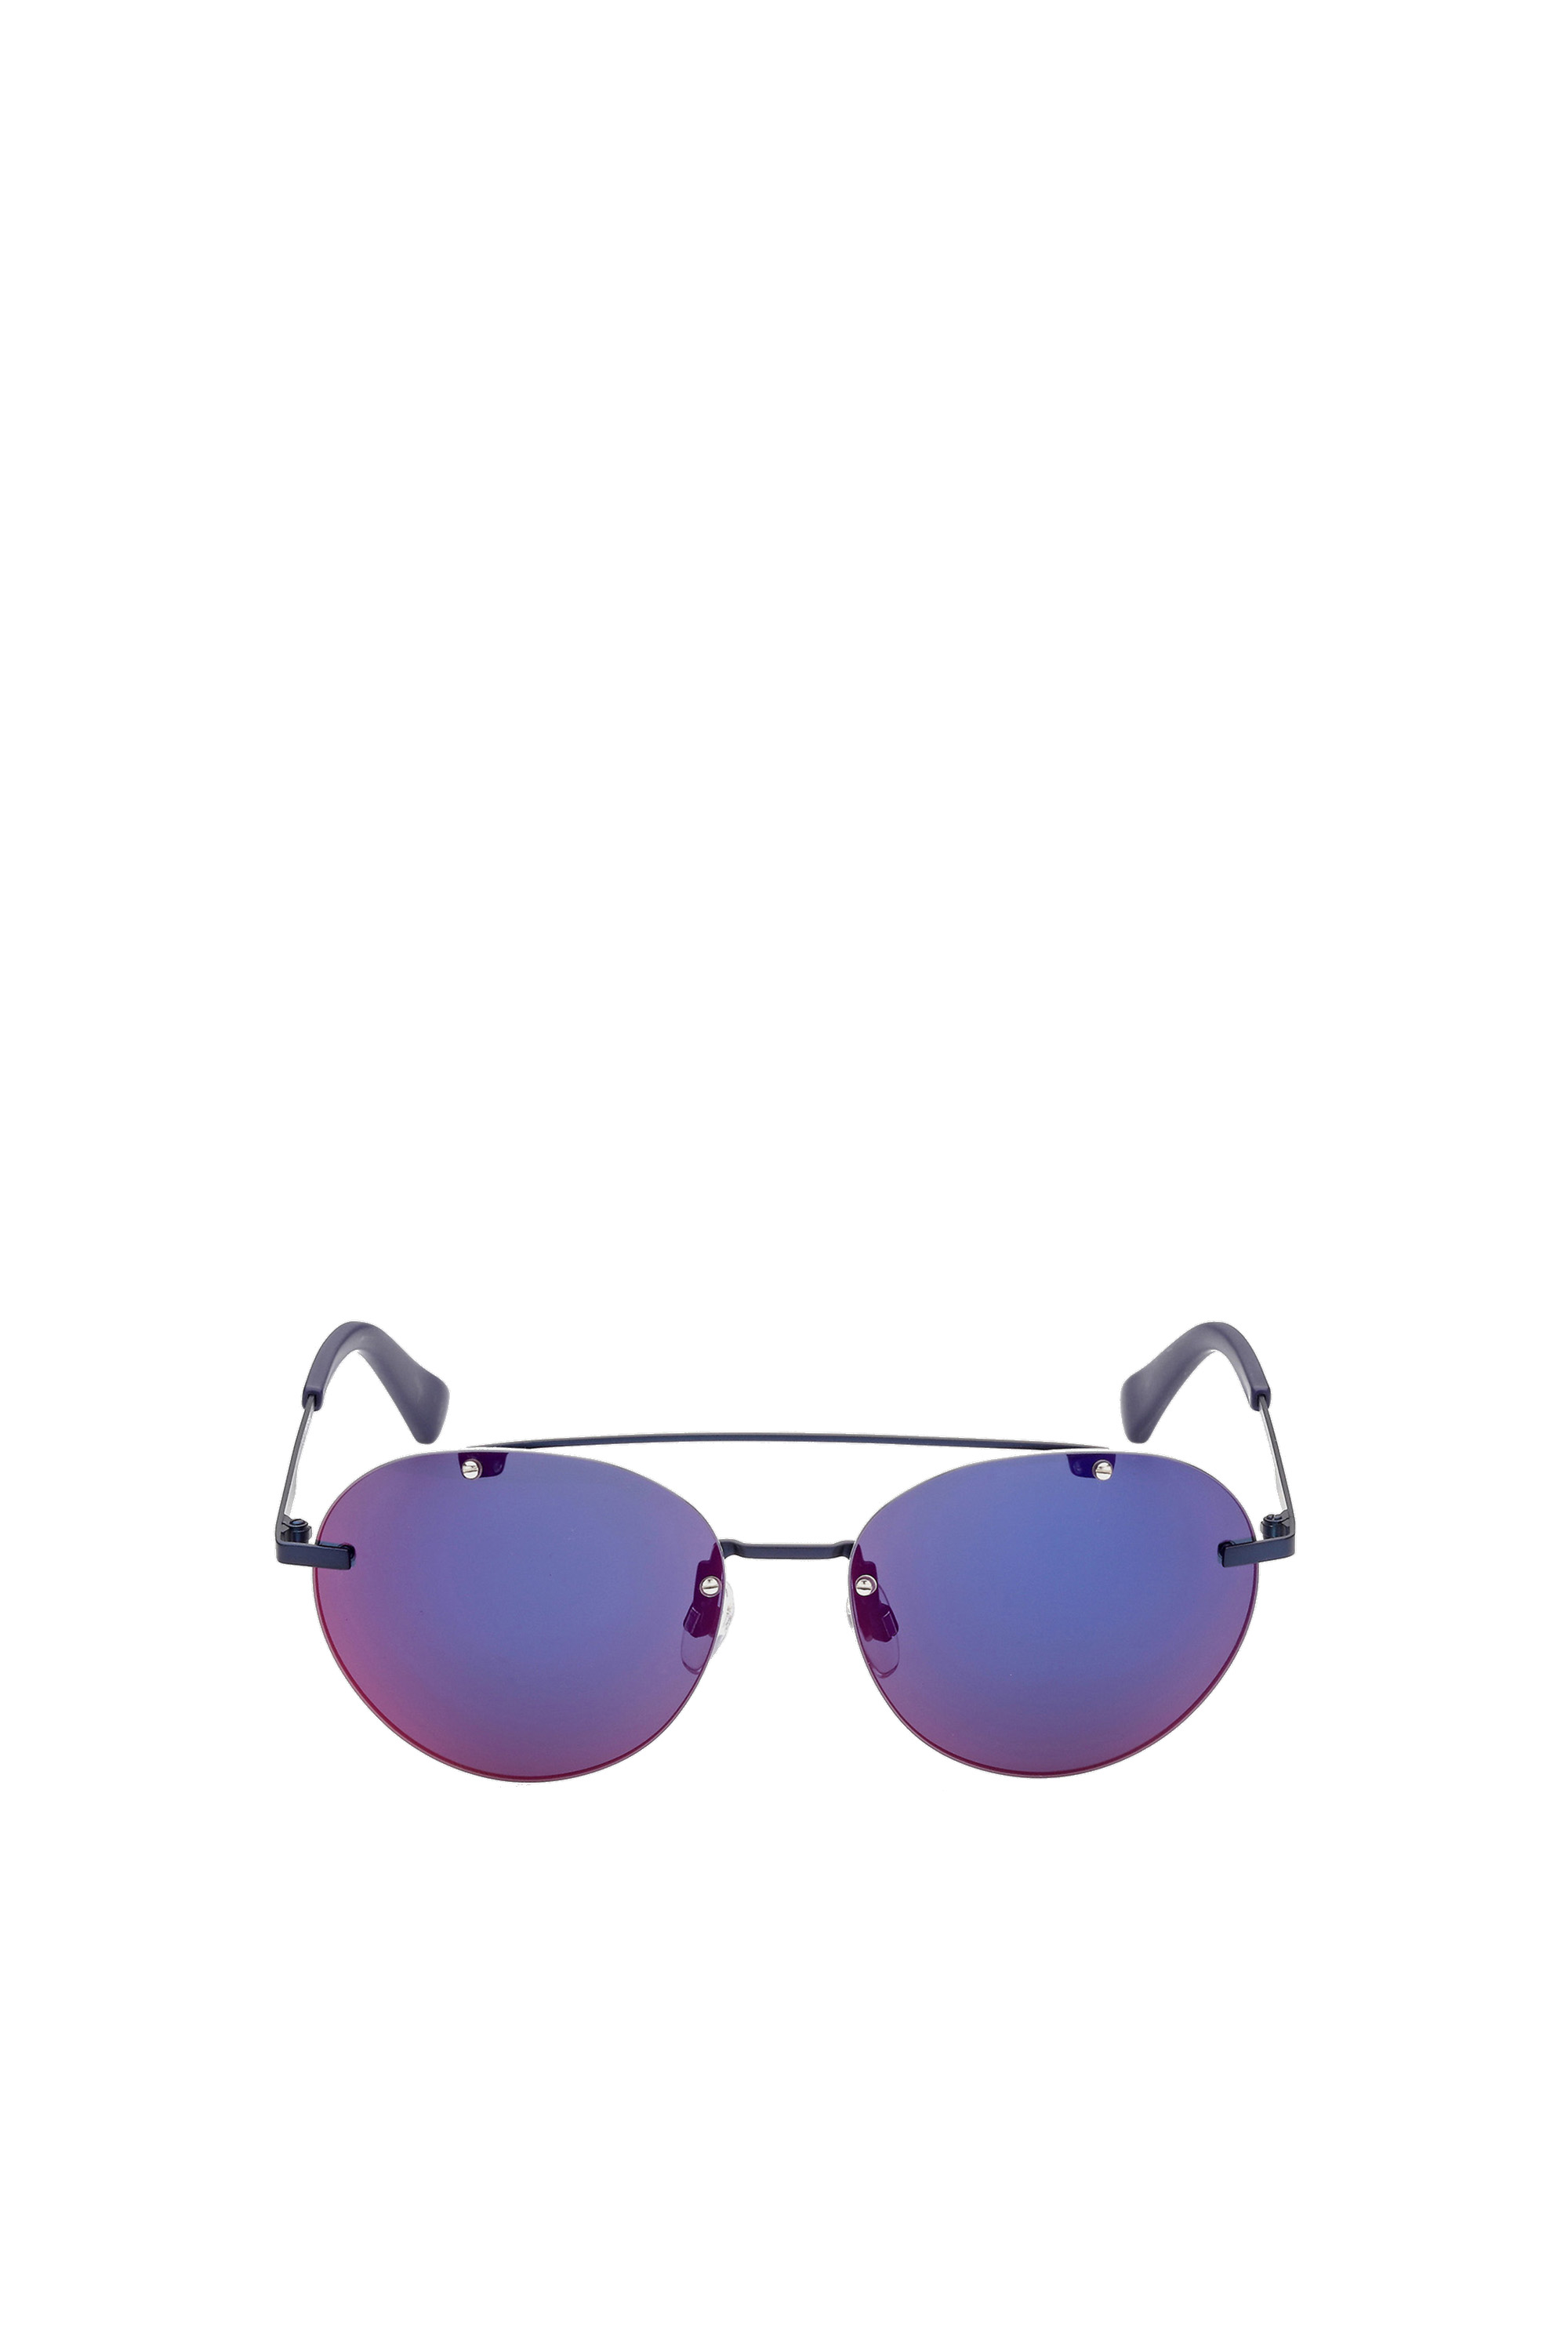 Diesel Round Sunglasses With Lightweight Metal Construction In Blue